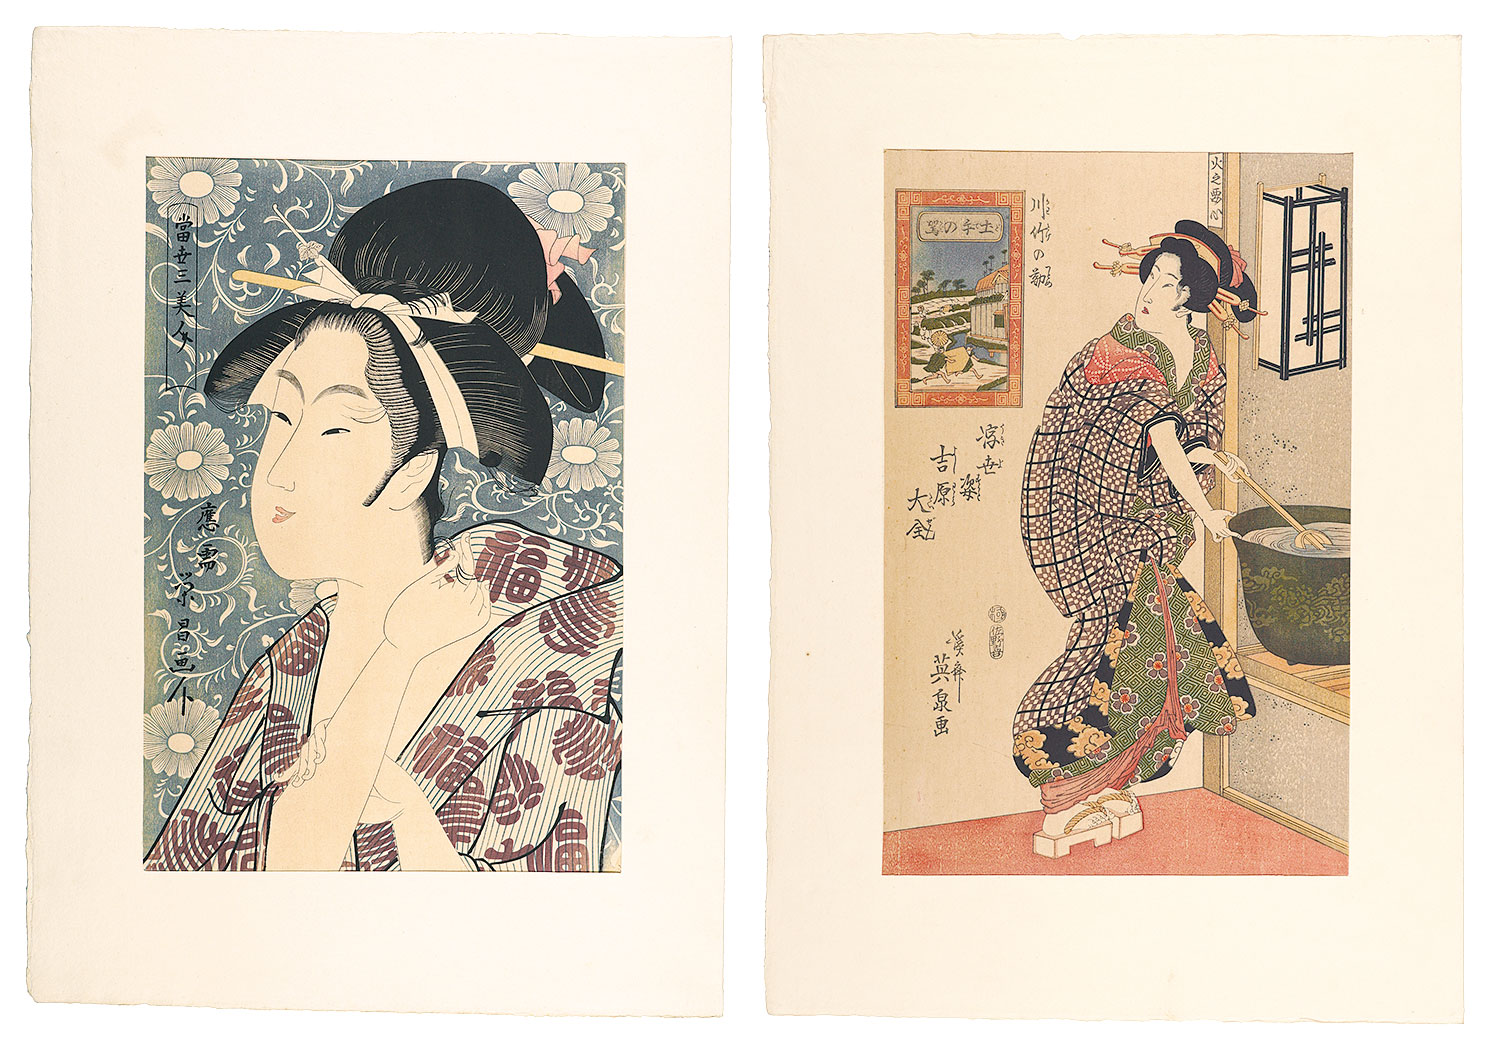 Eisen, Eisho ｢A Night Scene of the Tea-house  / A Beauty of Summer 【Reproduction】｣／